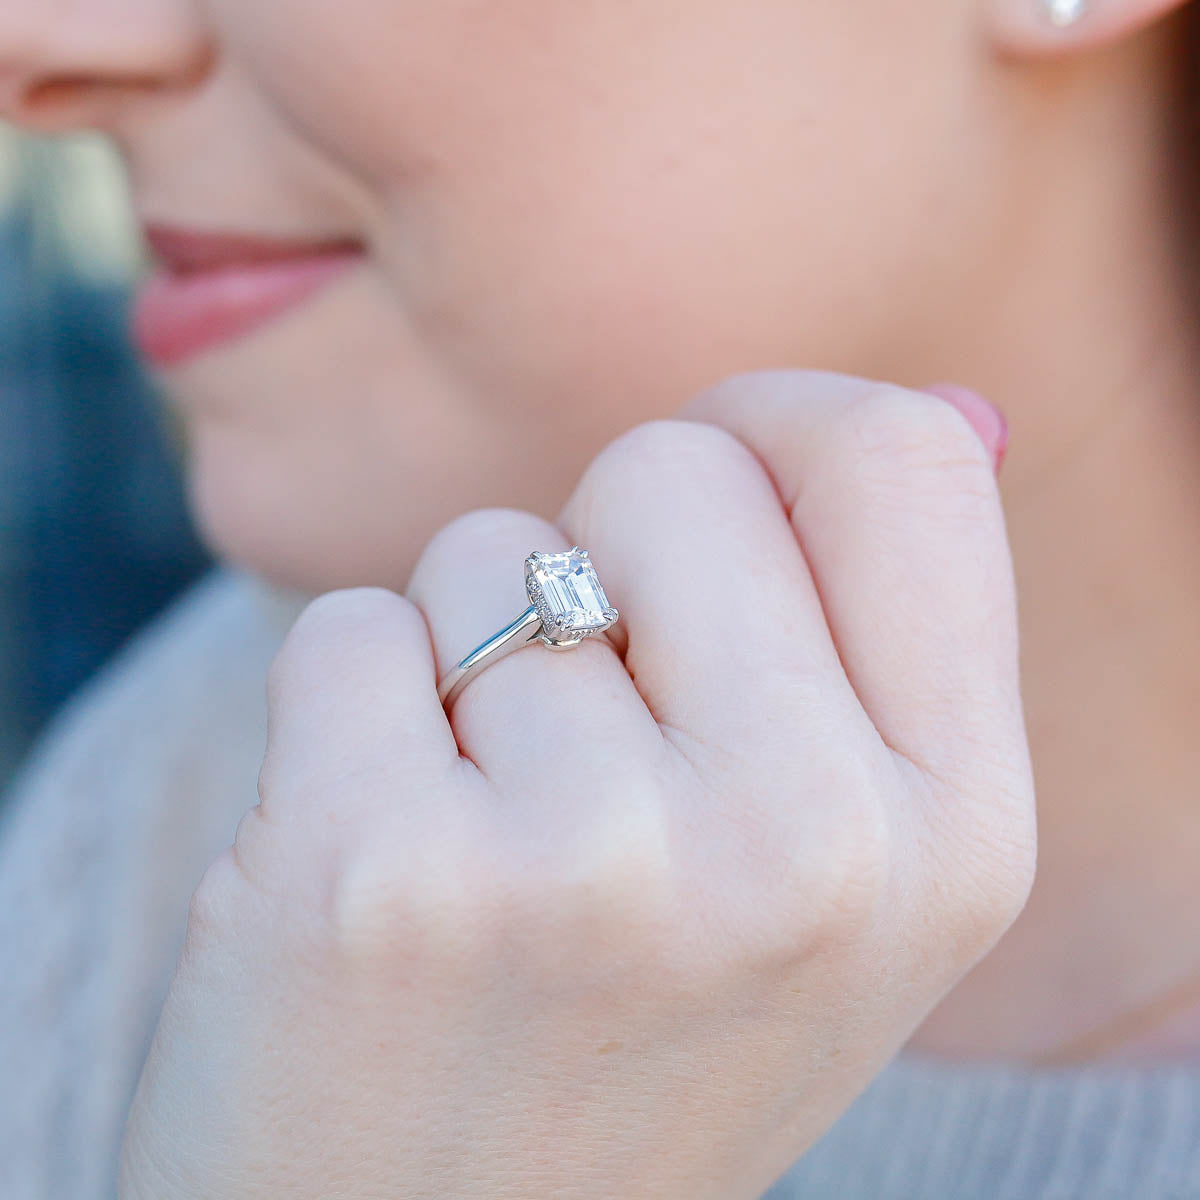 how to repurpose an old engagement ring